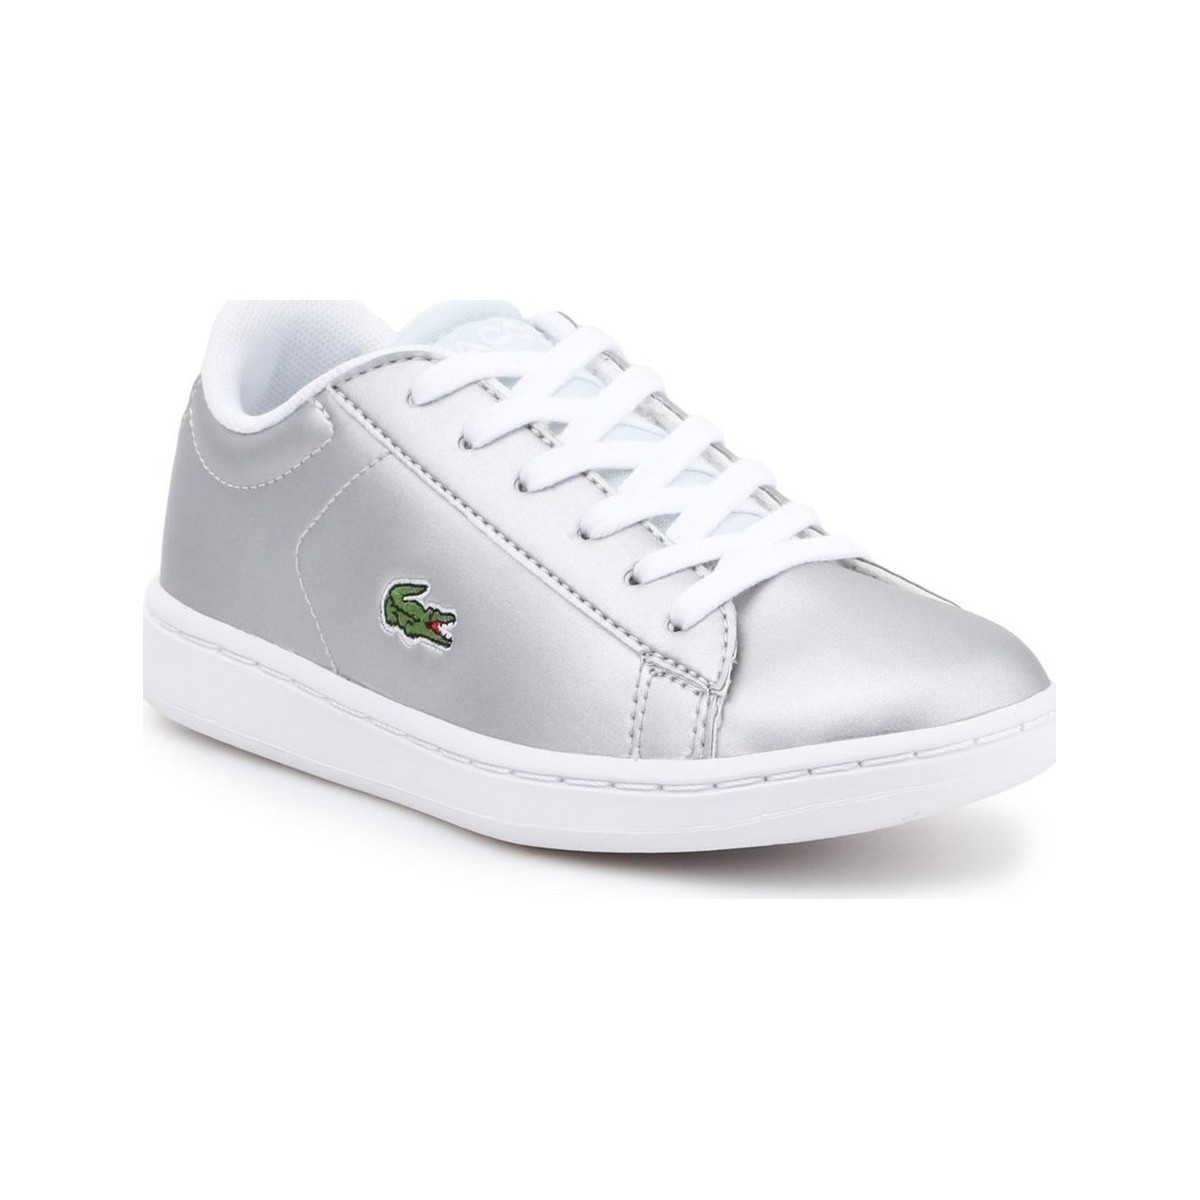 lacoste  734spc0006334  boys's children's shoes (trainers) in silver